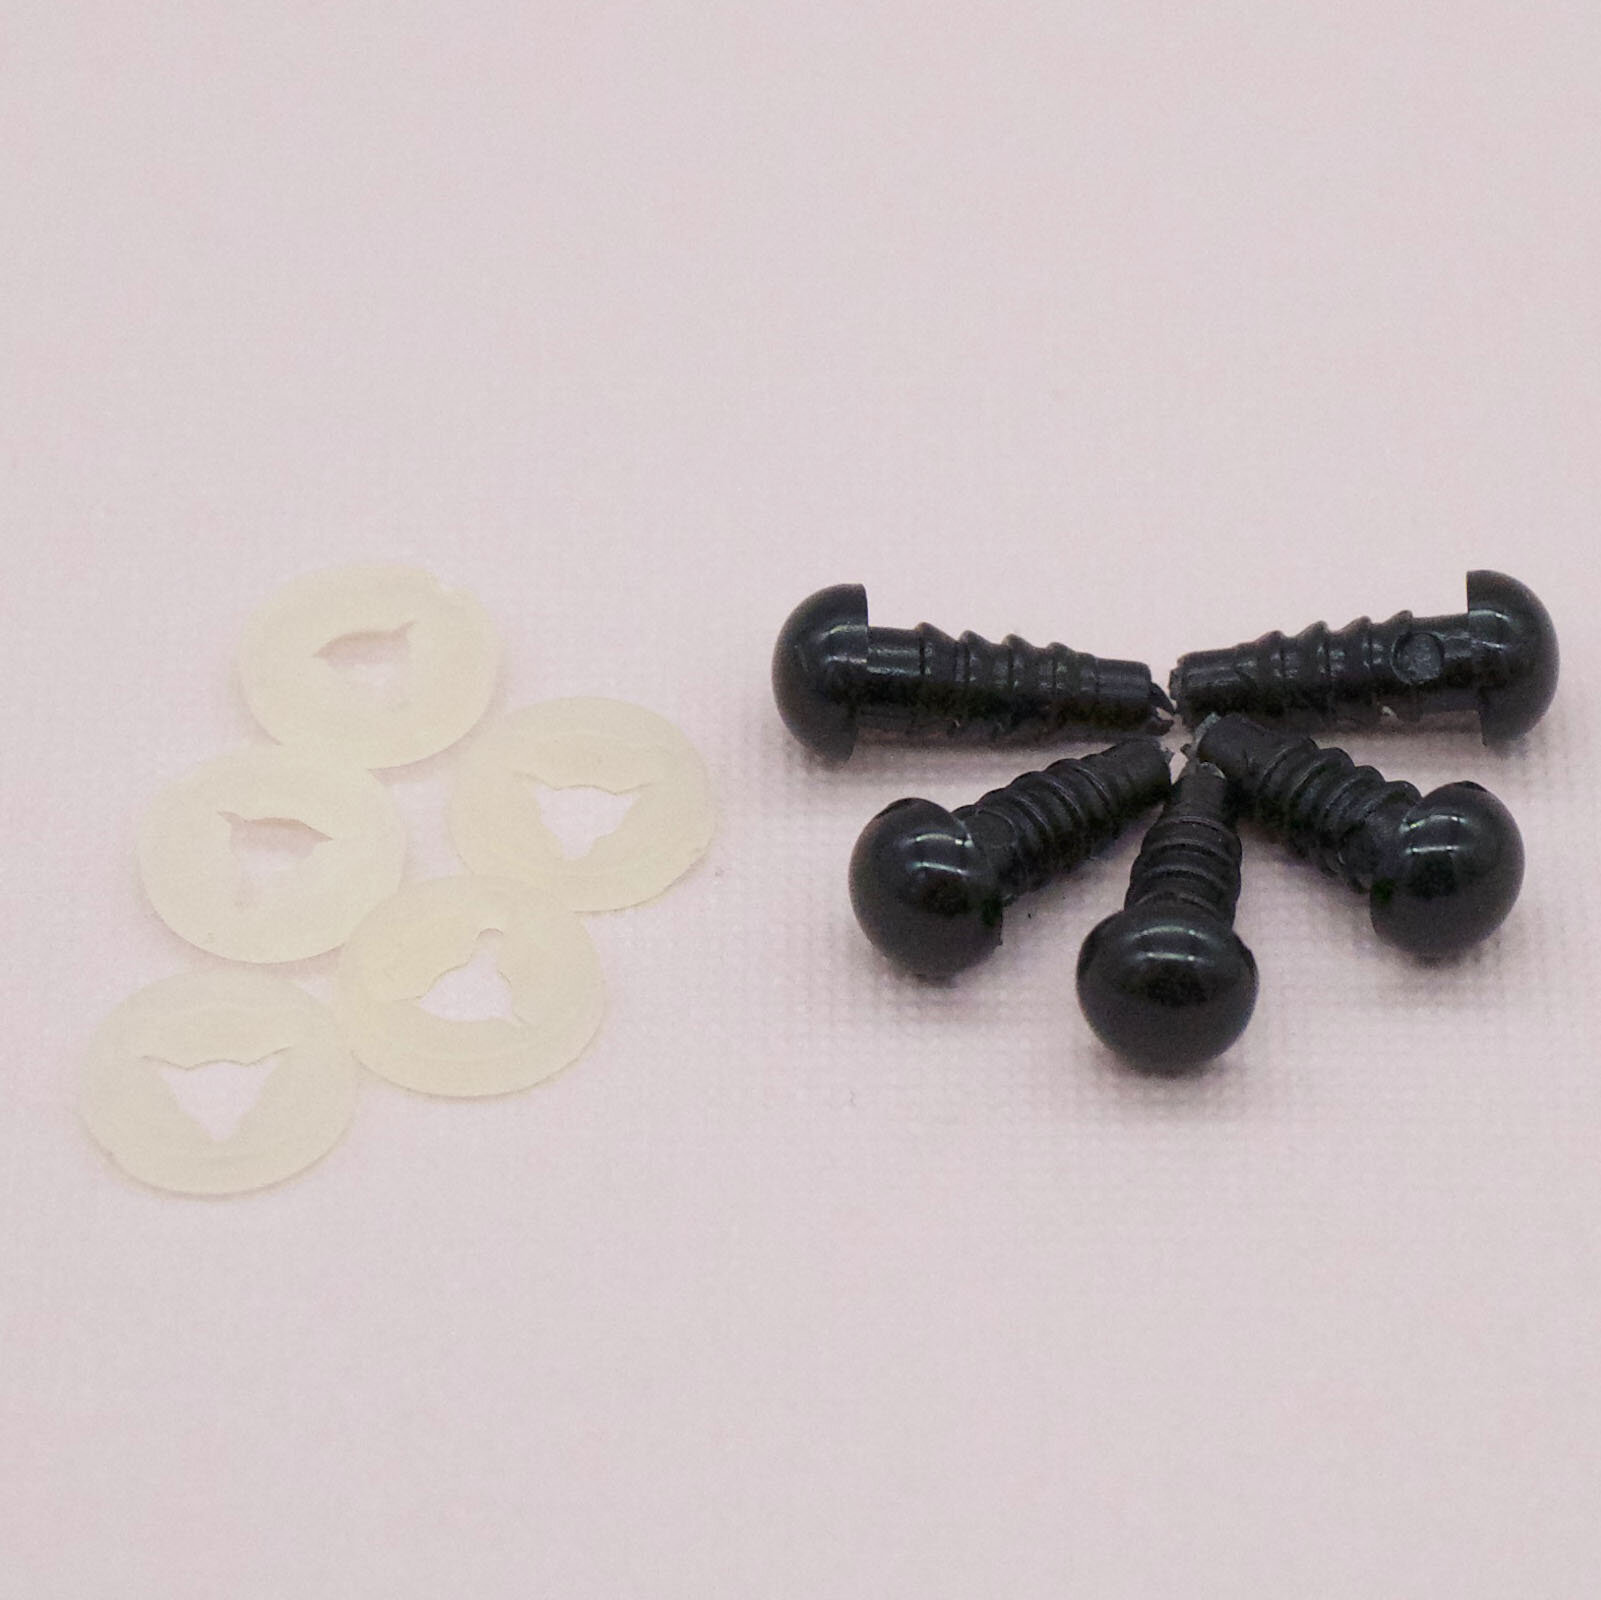 6mm Safety Eyes in Black - 5 Pairs 